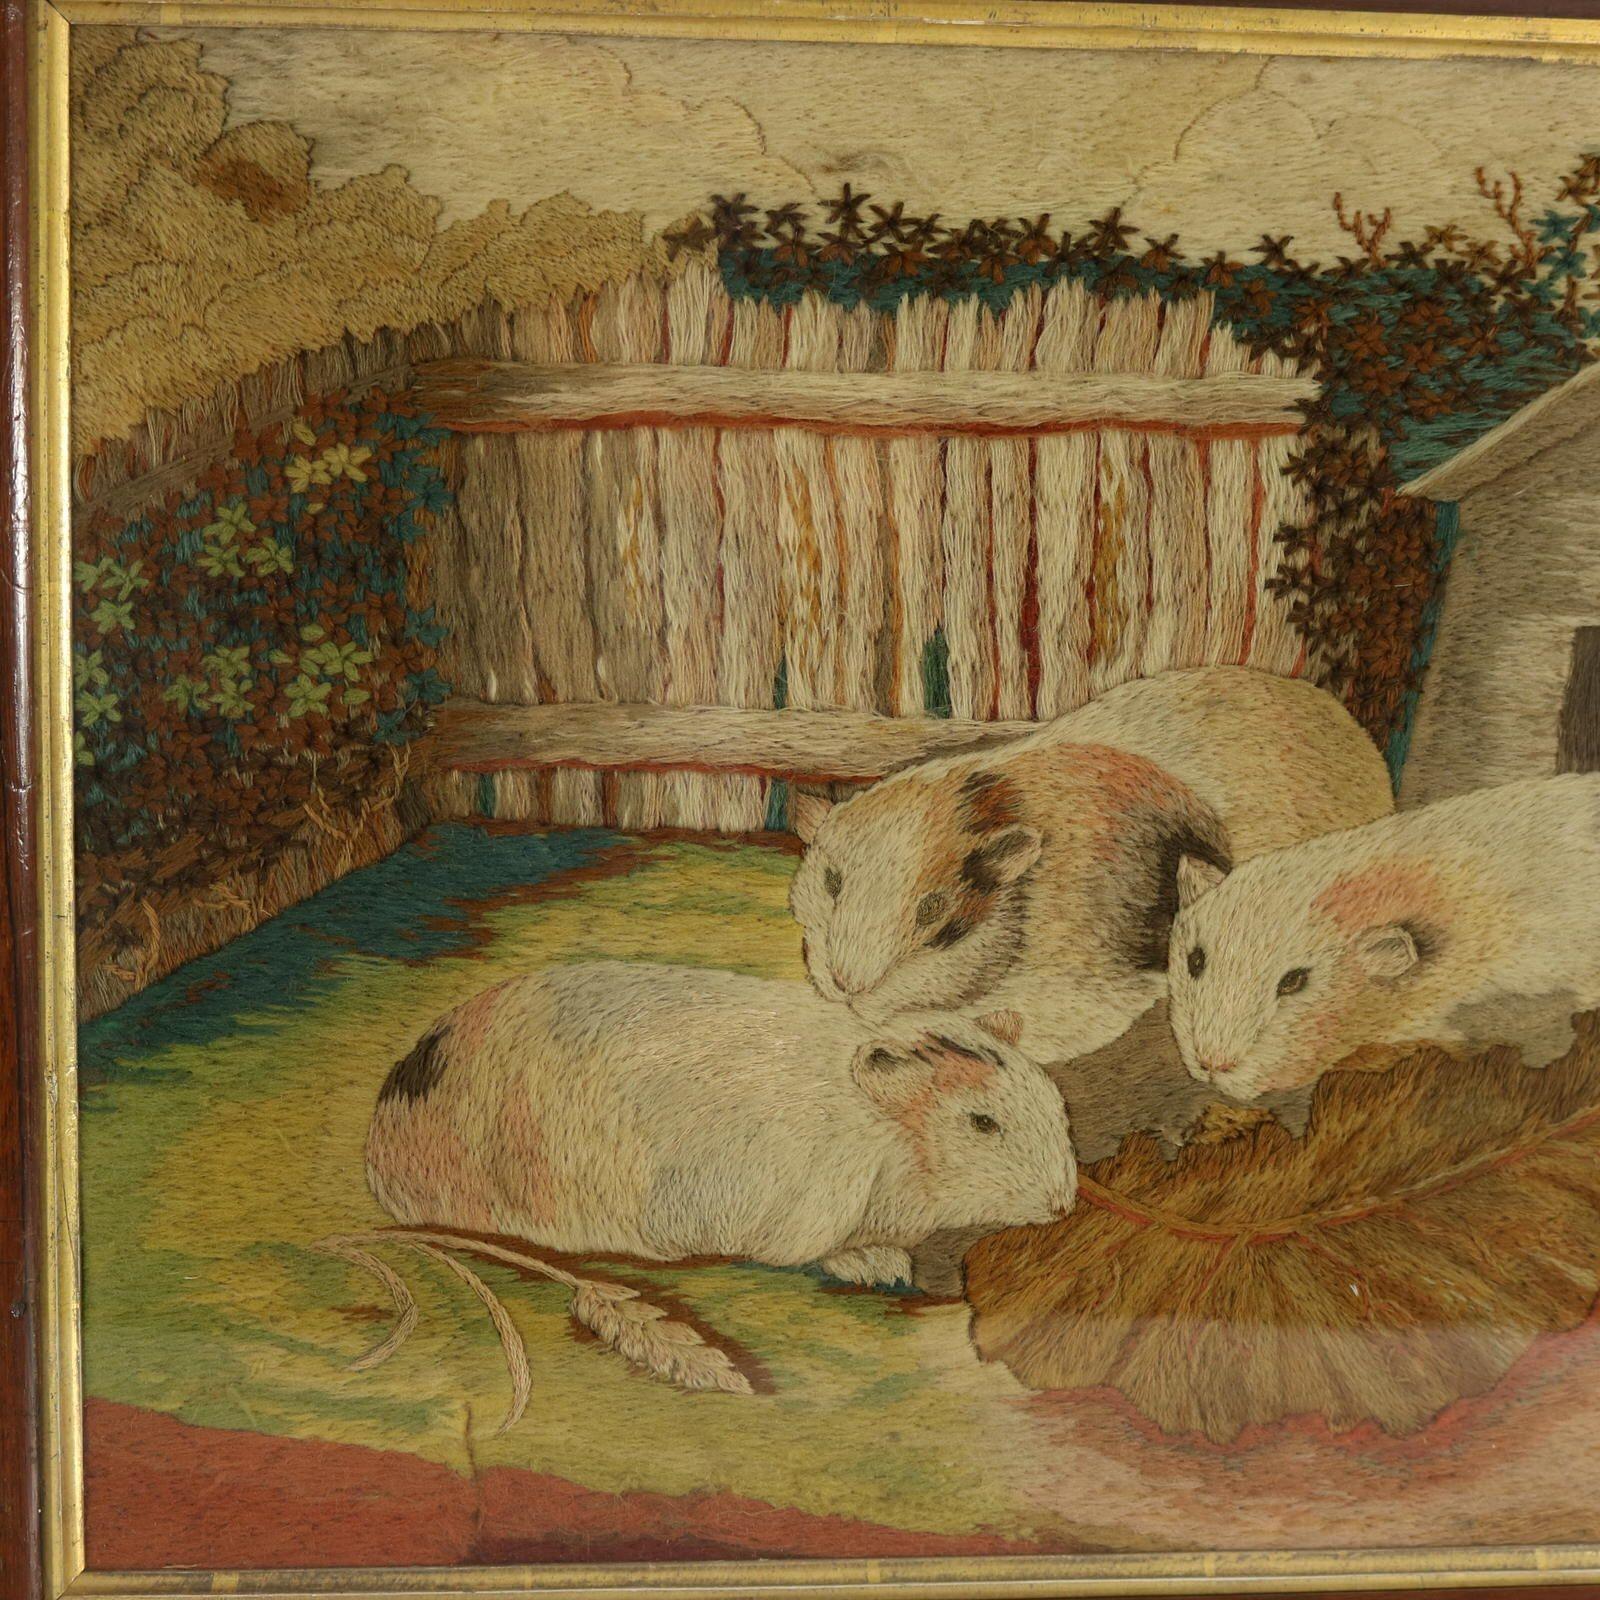 Georgian Woolwork Embroidered Picture of Guinea Pigs in a garden scene. The embroidery is worked in wool threads on a canvas ground, in a variety of stitches. Pictorial scene depicts three guinea pigs in their pen. A vegetable leaf in the